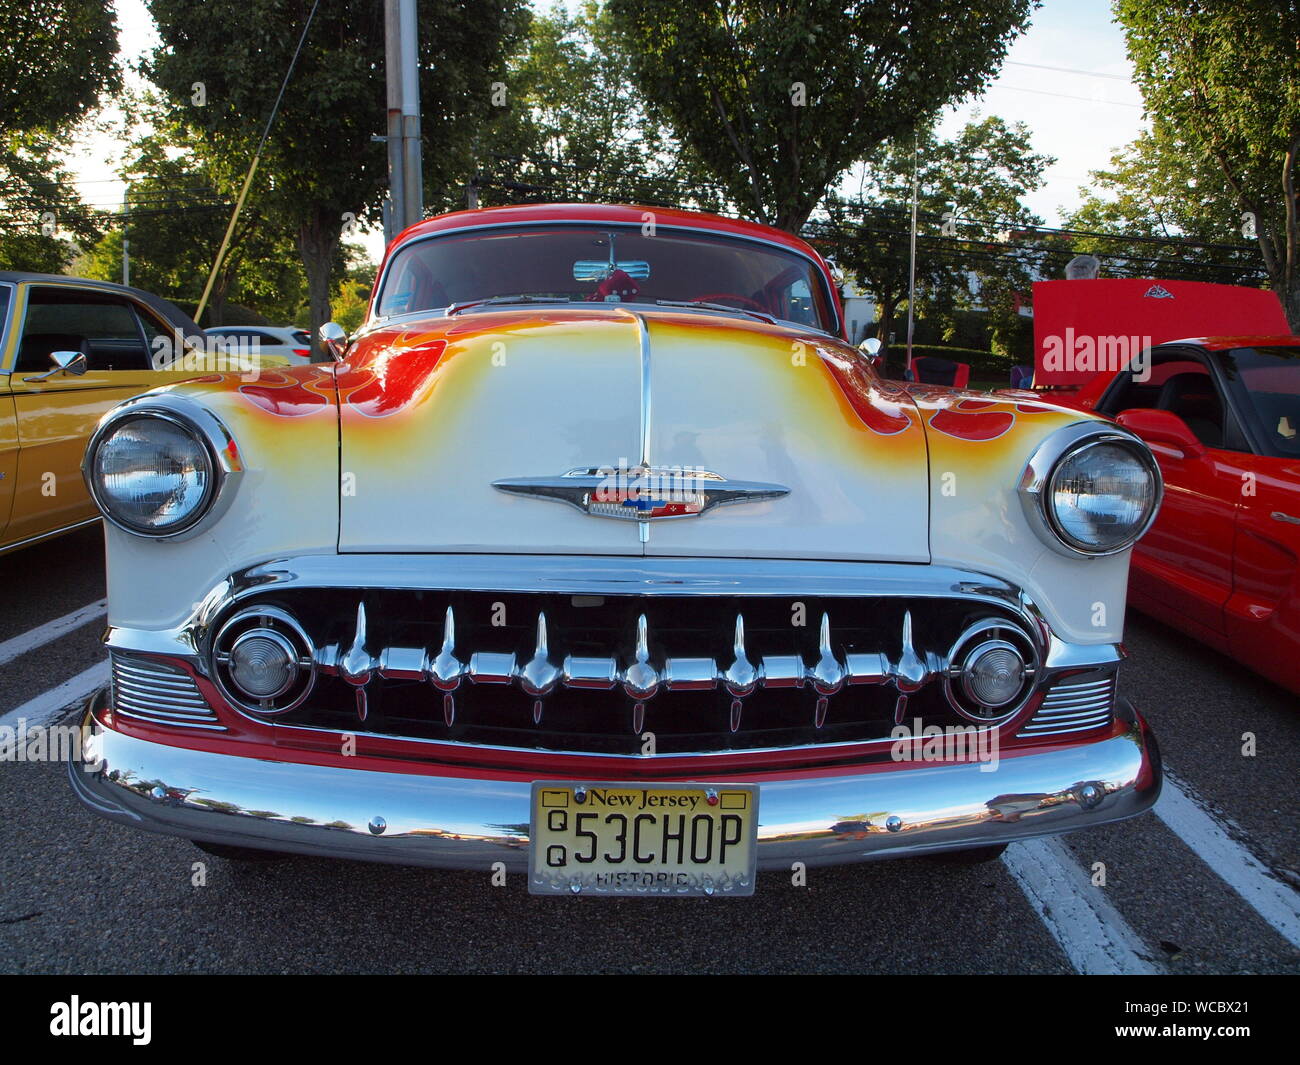 Customized 1953 Chevy BelAir at a local car show with heavy chrome and flamed paint in reds and oranges on a white hood. Stock Photo